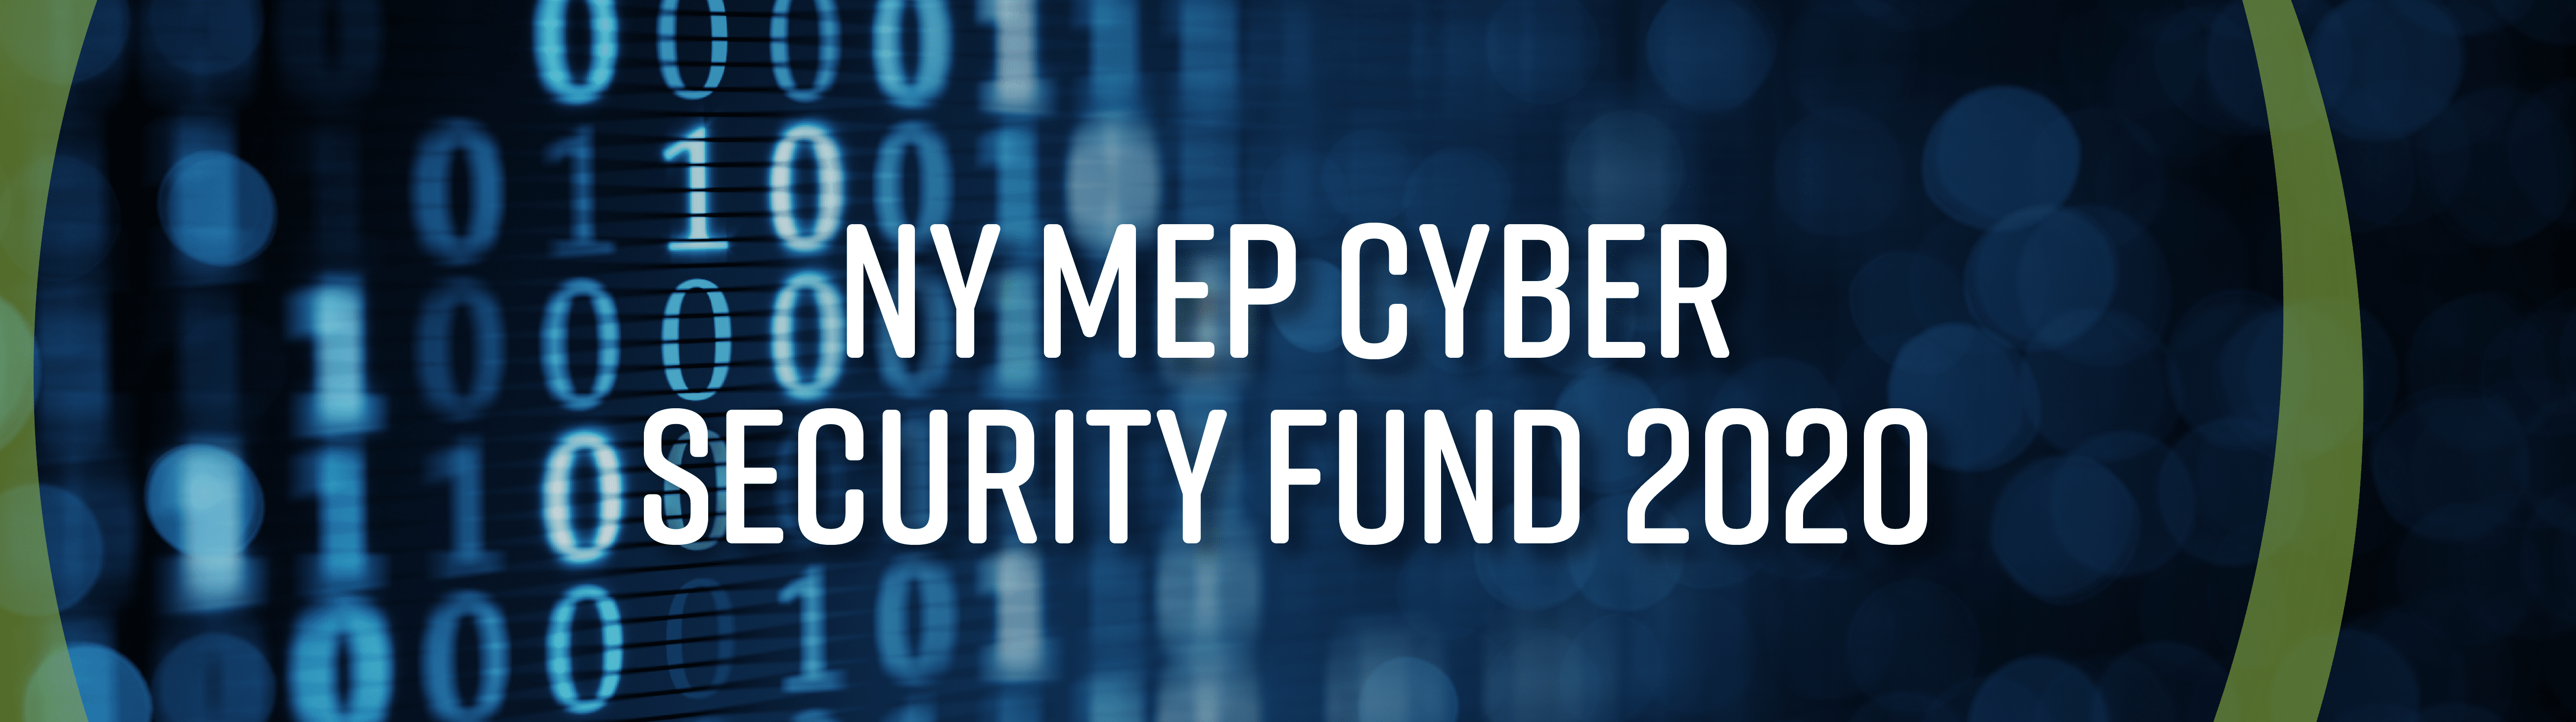 NY MEP Cybersecurity Fund 2020